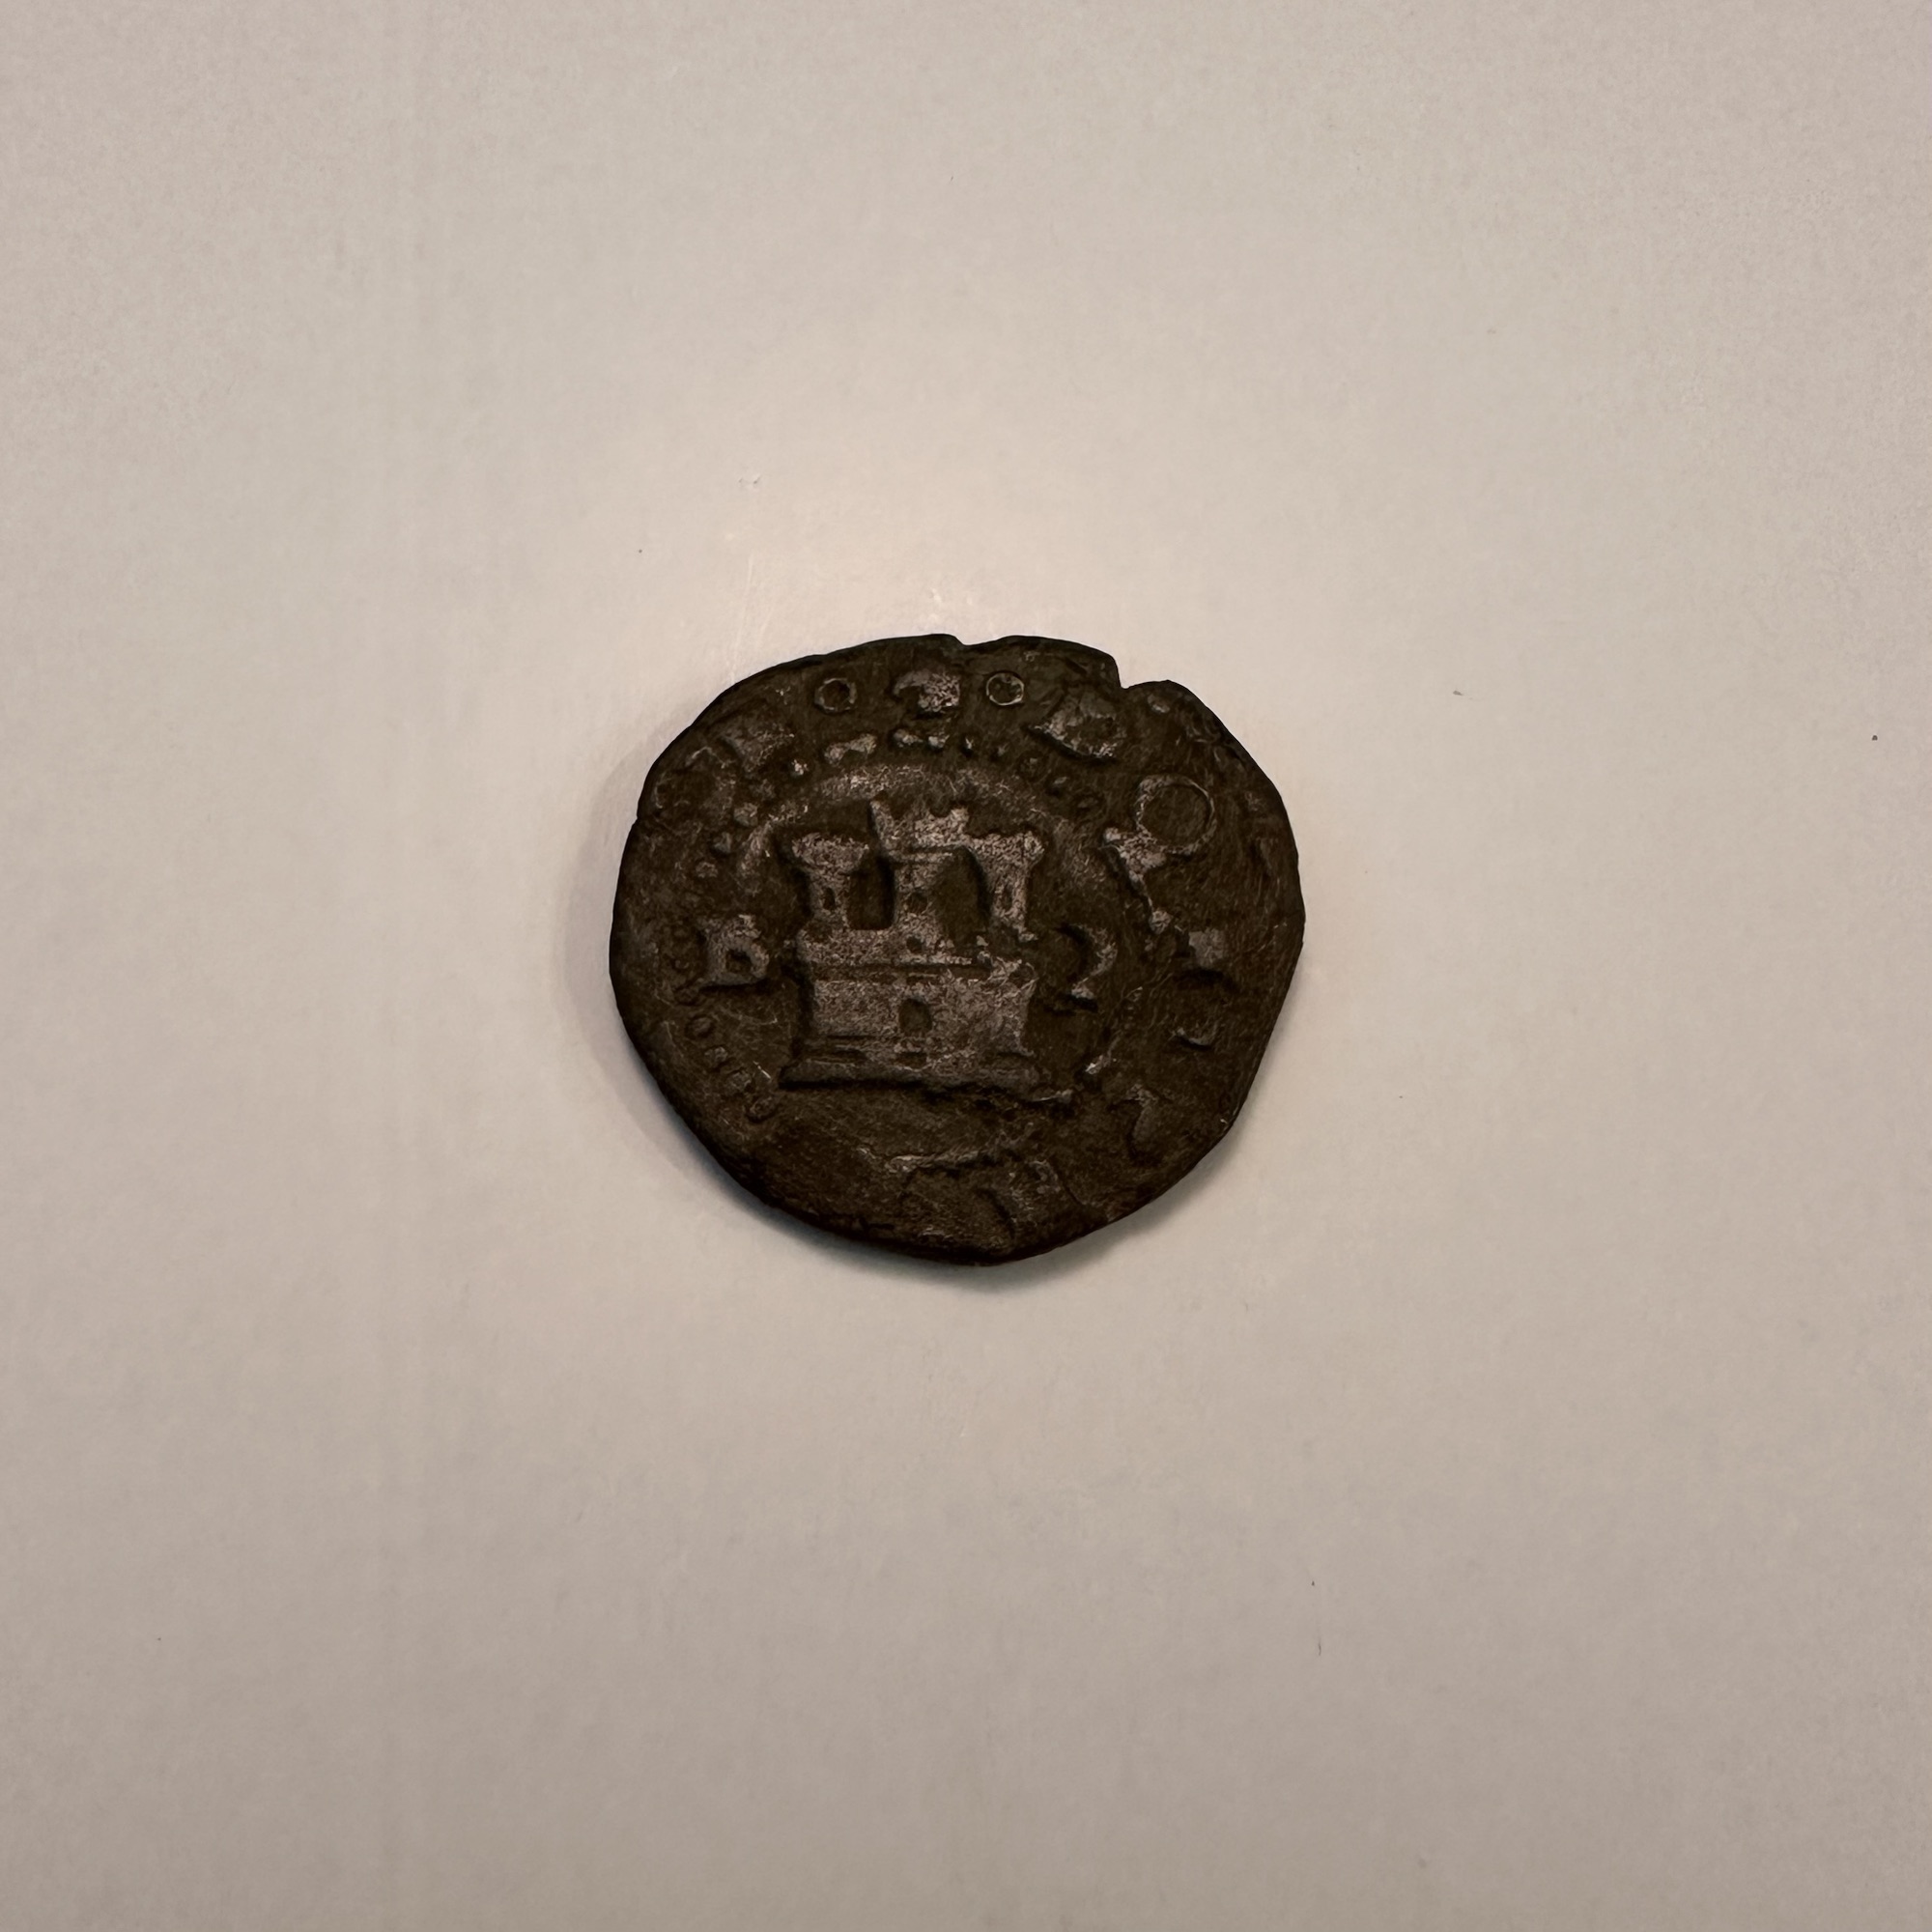 Pirate coin from spain. 1600's with beautiful castle on front.